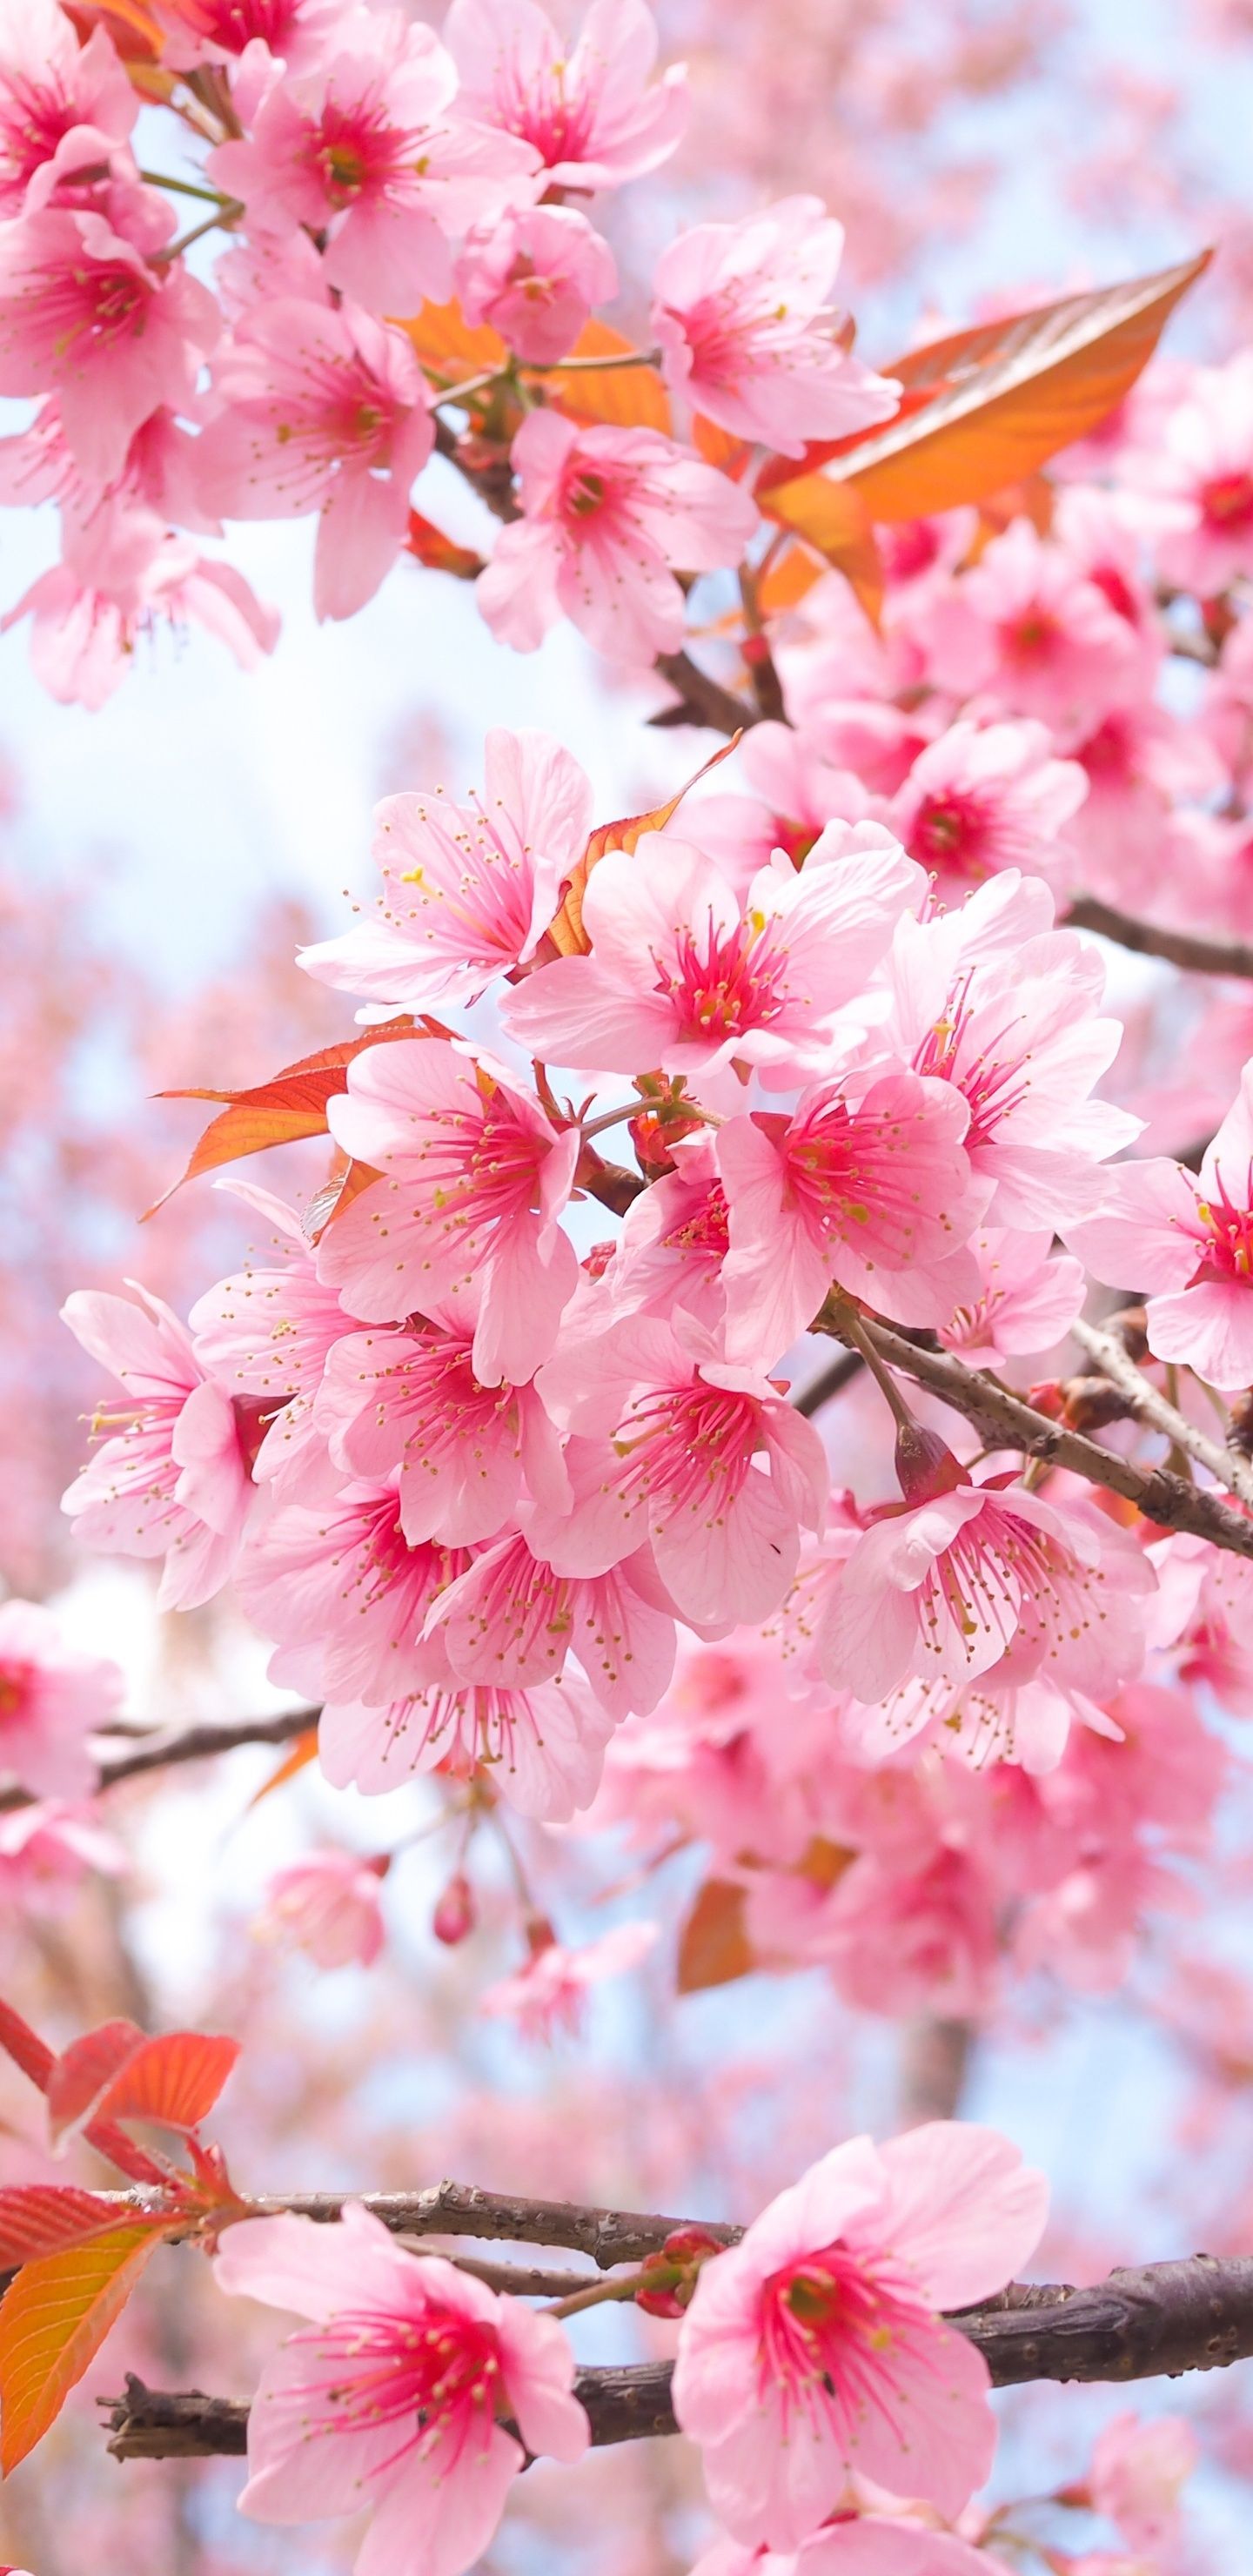 Cherry Blossom Tree Branches 4k In 1440x2960 Resolution. Cherry blossom wallpaper, Cherry blossom wallpaper iphone, Cherry blossom picture